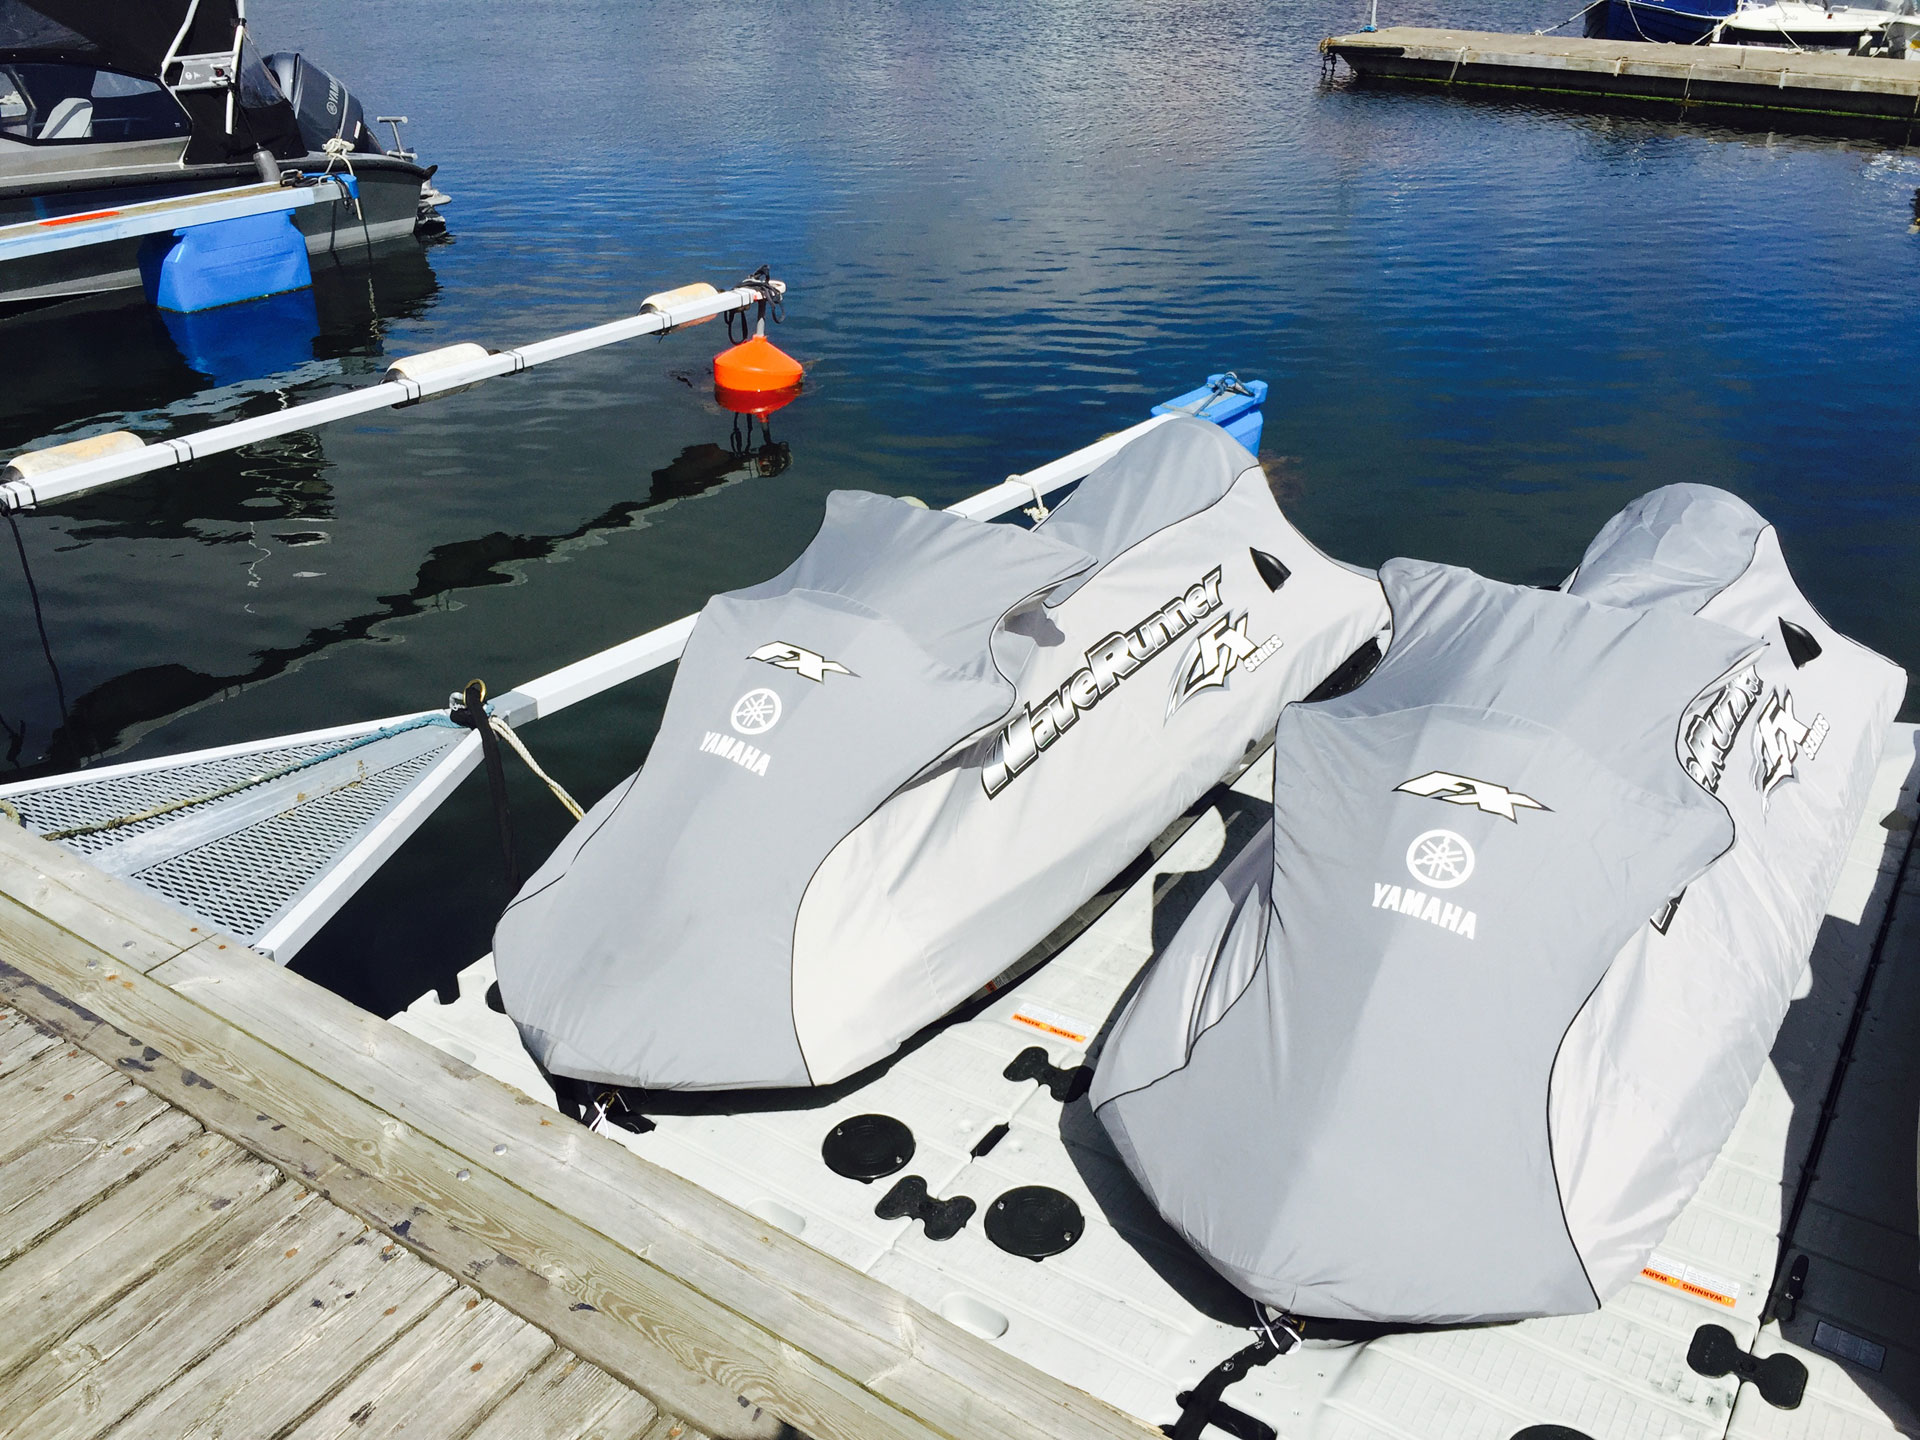 Two new Waverunners delivered